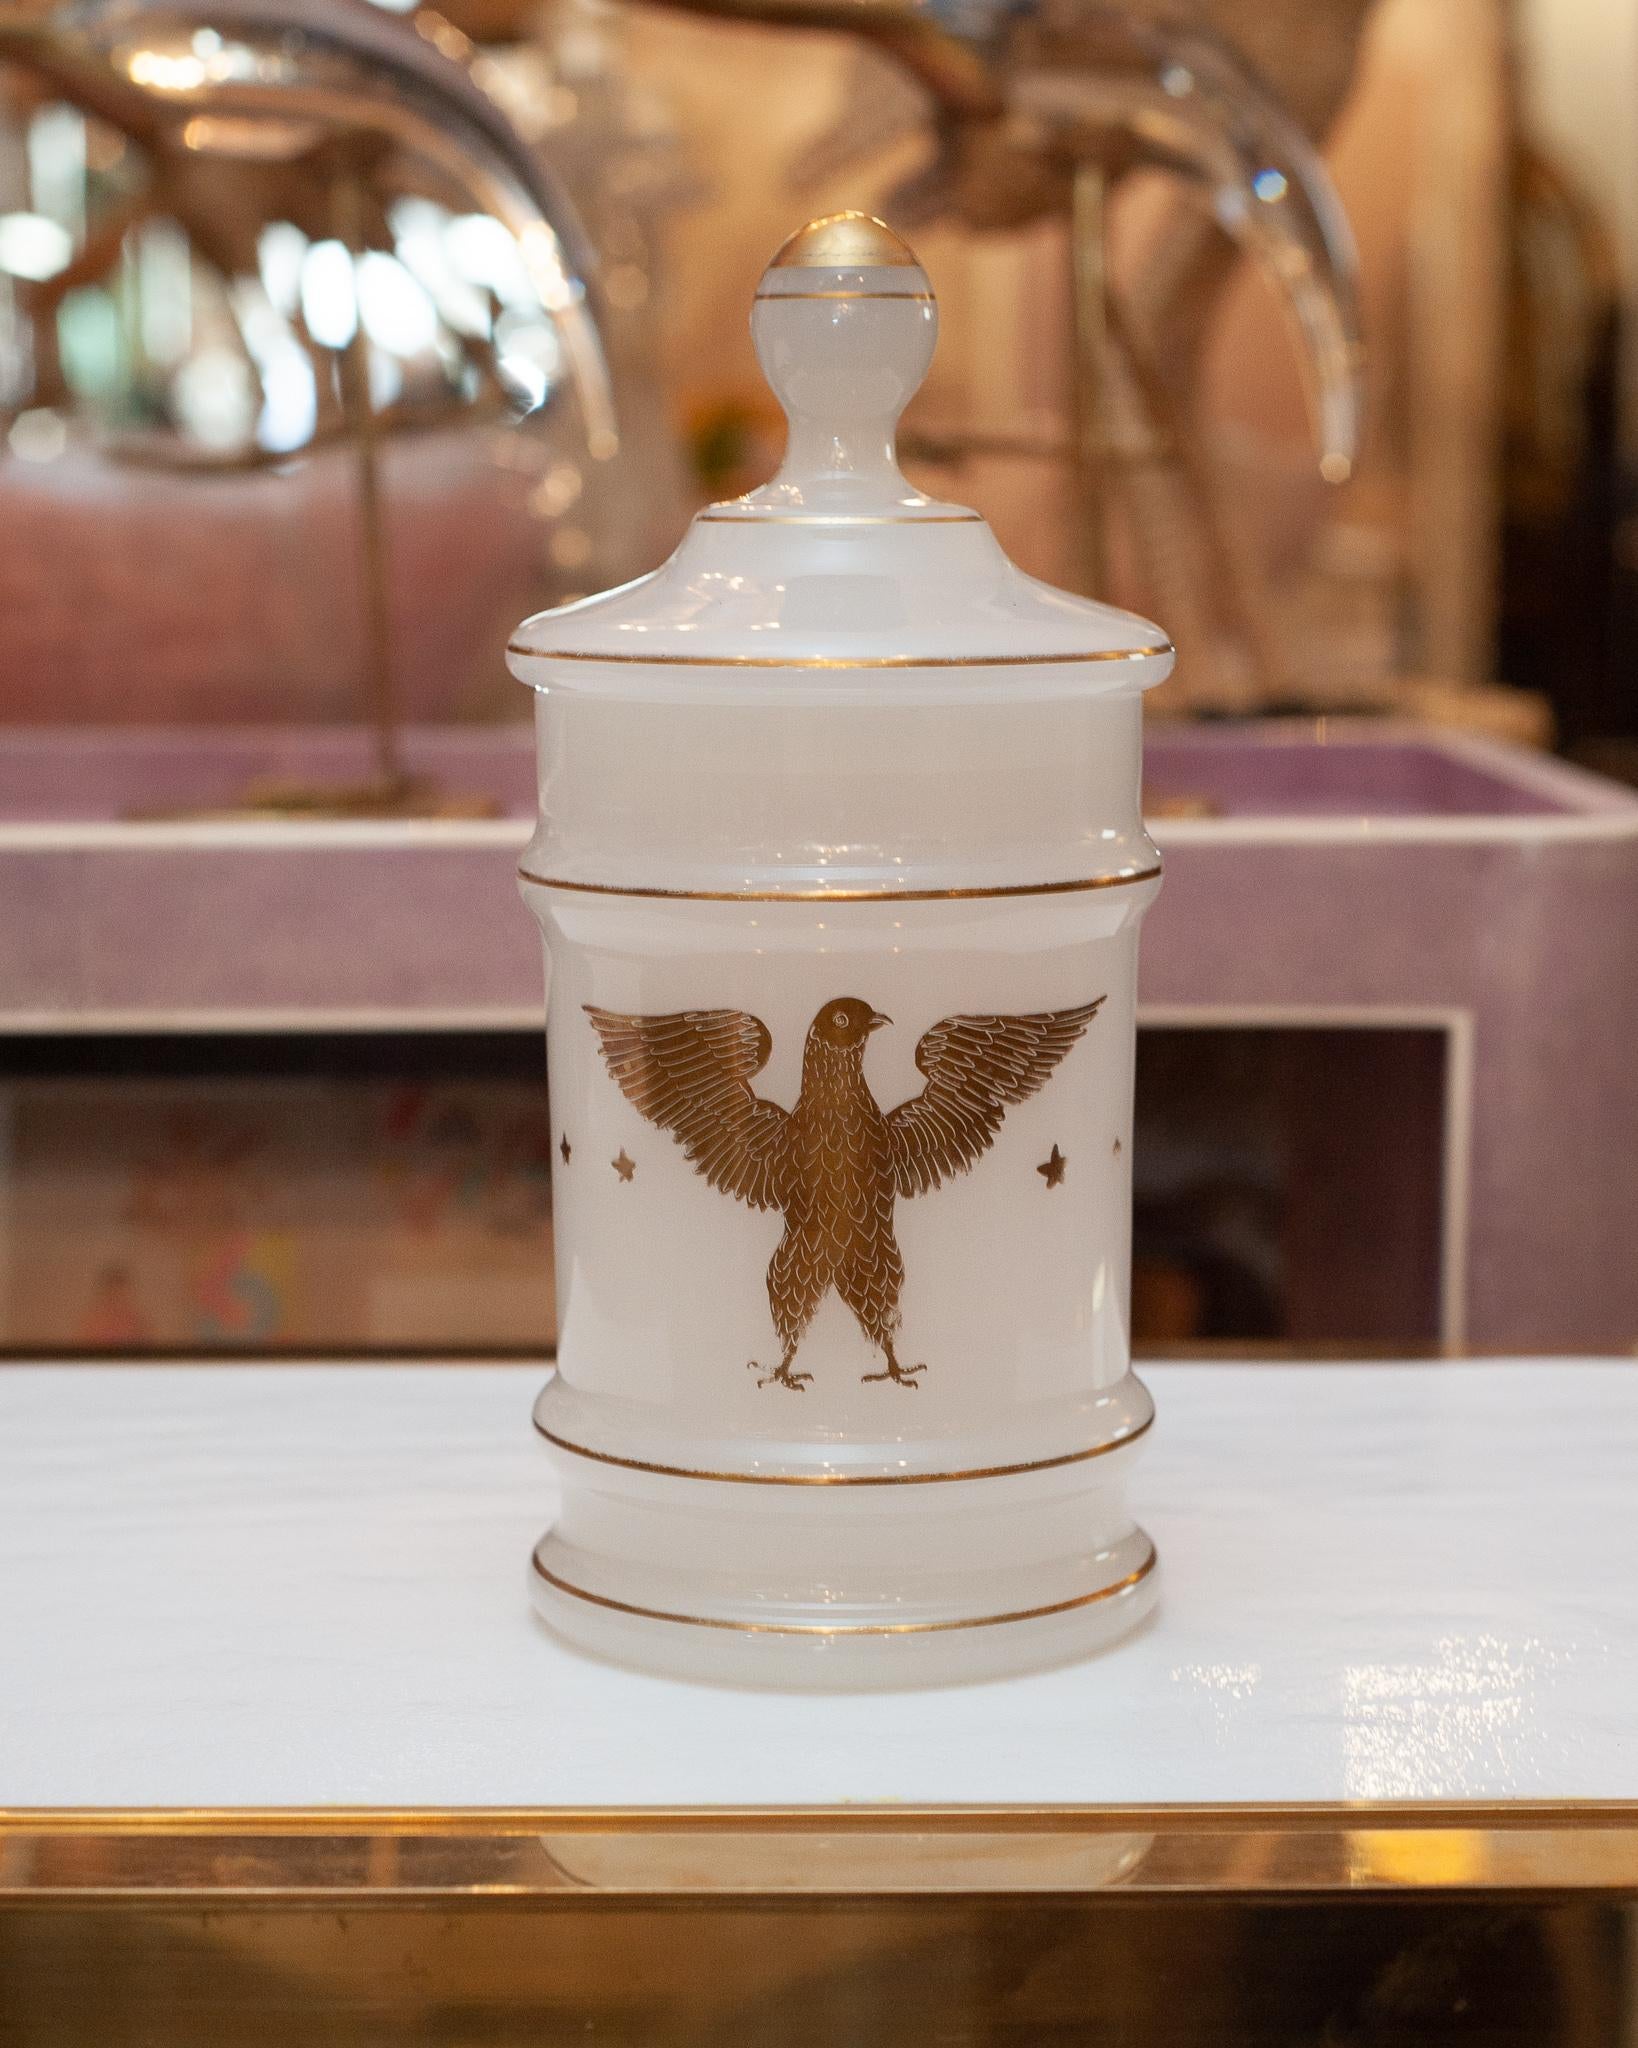 A well preserved and unique French opaline glass jar from the Empire period. Opaline glass was made in France between the years of 1810-1890. This Empire opaline jar with lid has a gold leafed eagle motif and would be appropriate in a bathroom to